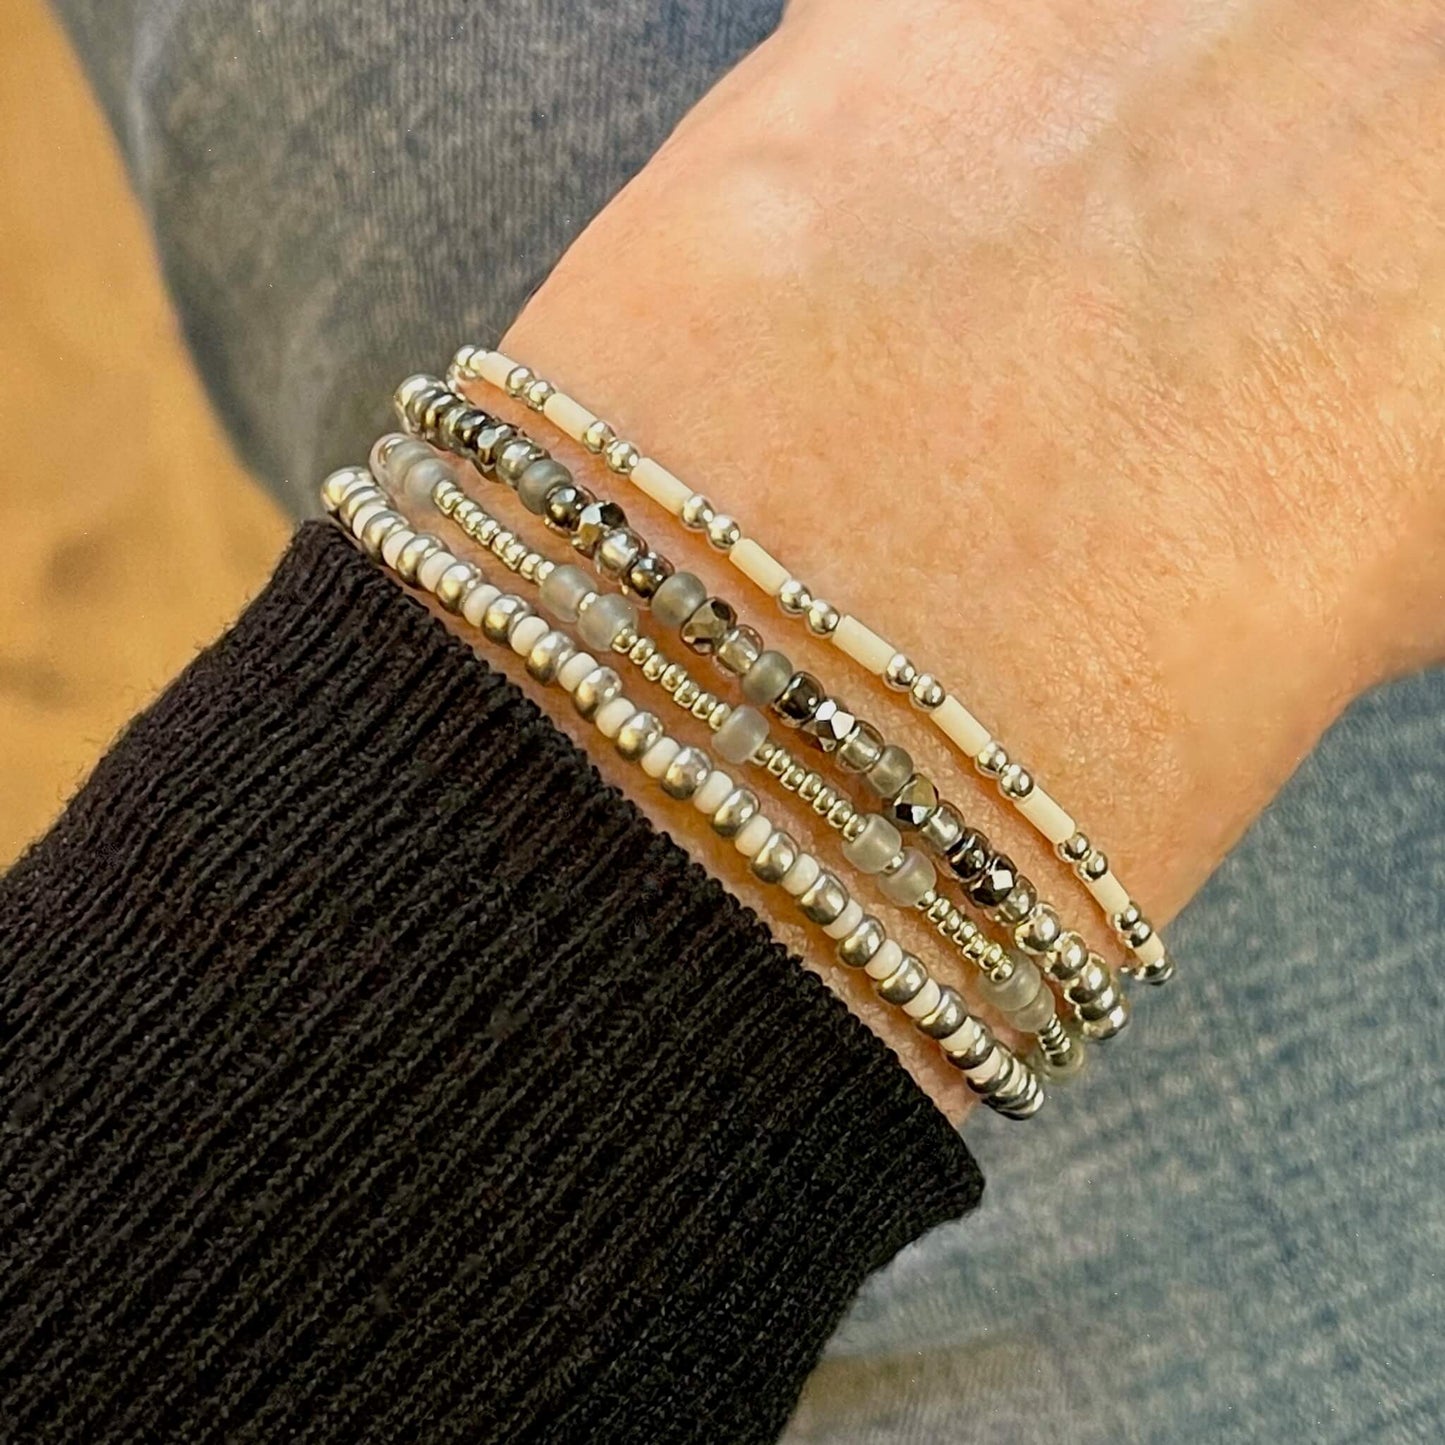 Silver seed bead bracelet stack of 4 stretch bracelets for women with grey and white accents. Handmade in NYC.